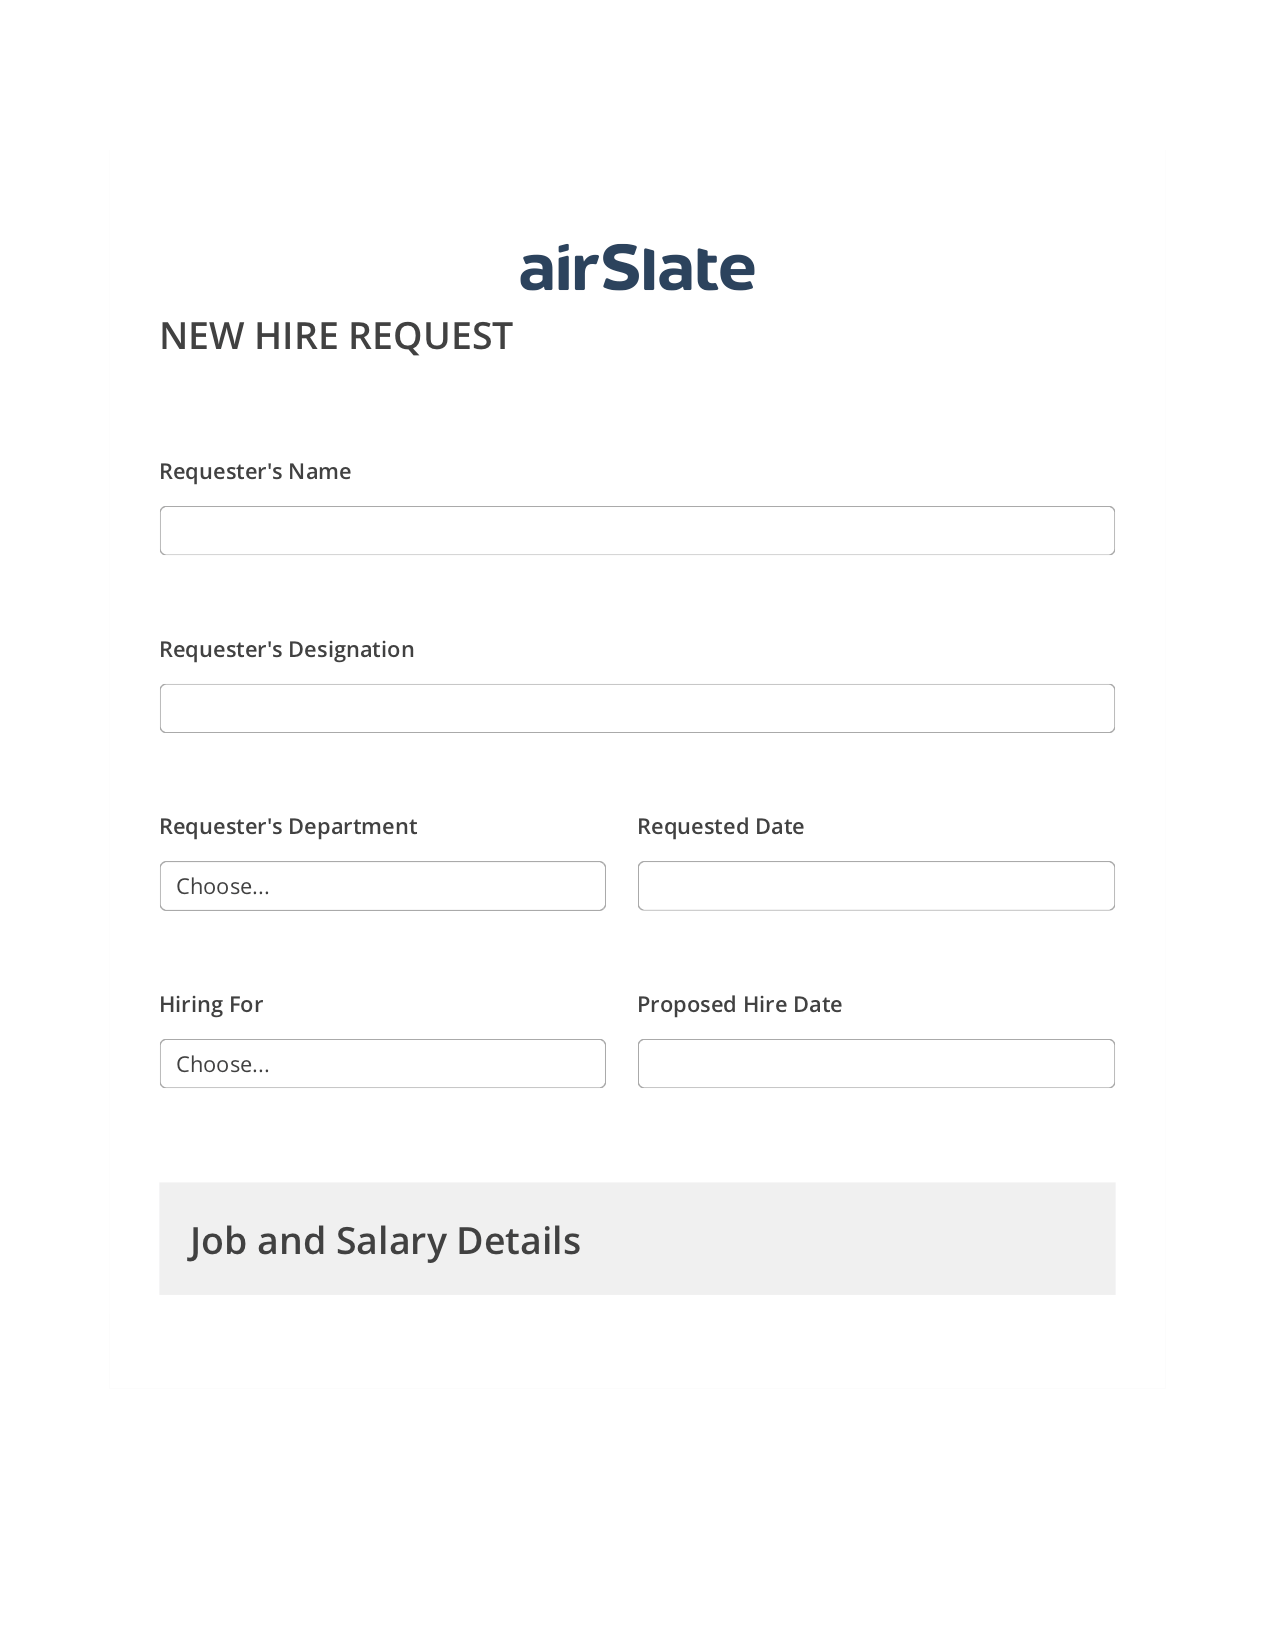 Hiring Request Workflow Pre-fill from CSV File Bot, Text Message Notification Bot, Post-finish Document Bot